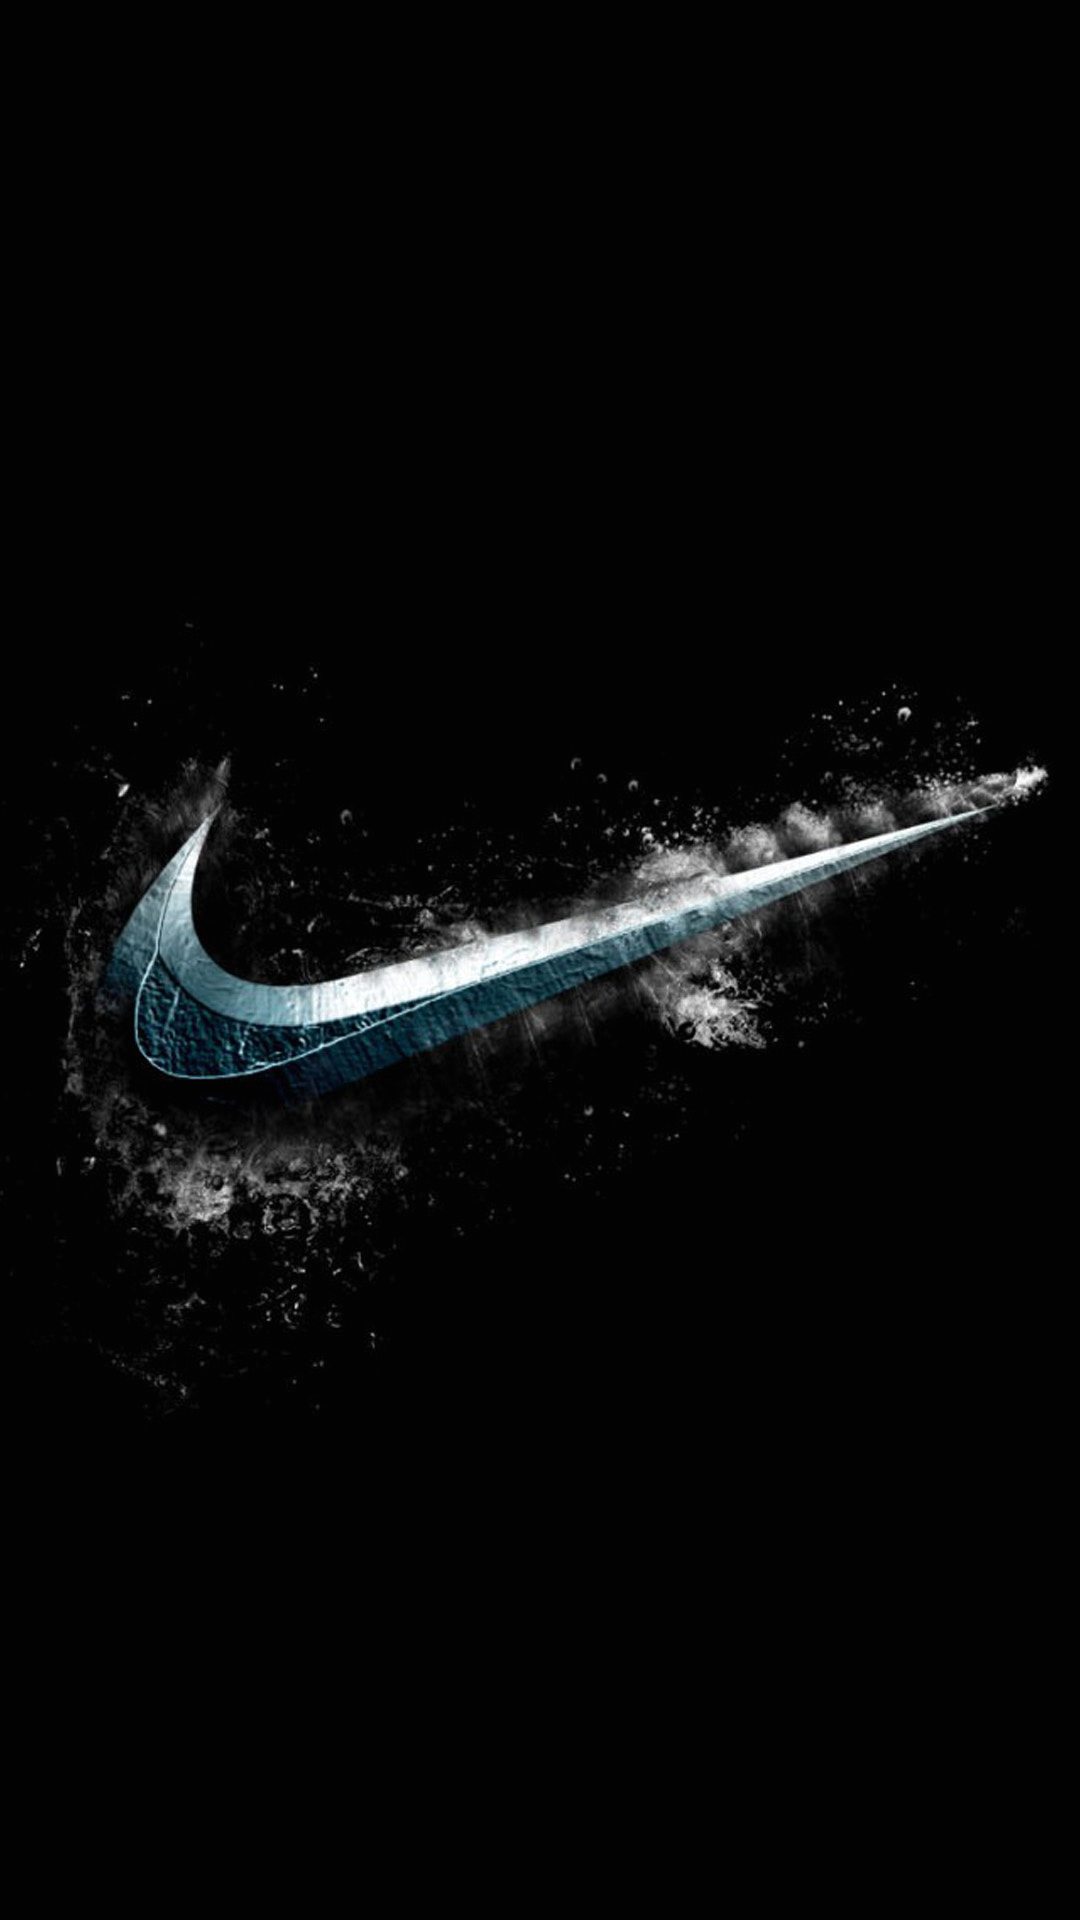 Nike Wallpaper for iPhone with high-resolution 1080x1920 pixel. You can use this wallpaper for your iPhone 5, 6, 7, 8, X, XS, XR backgrounds, Mobile Screensaver, or iPad Lock Screen - Nike